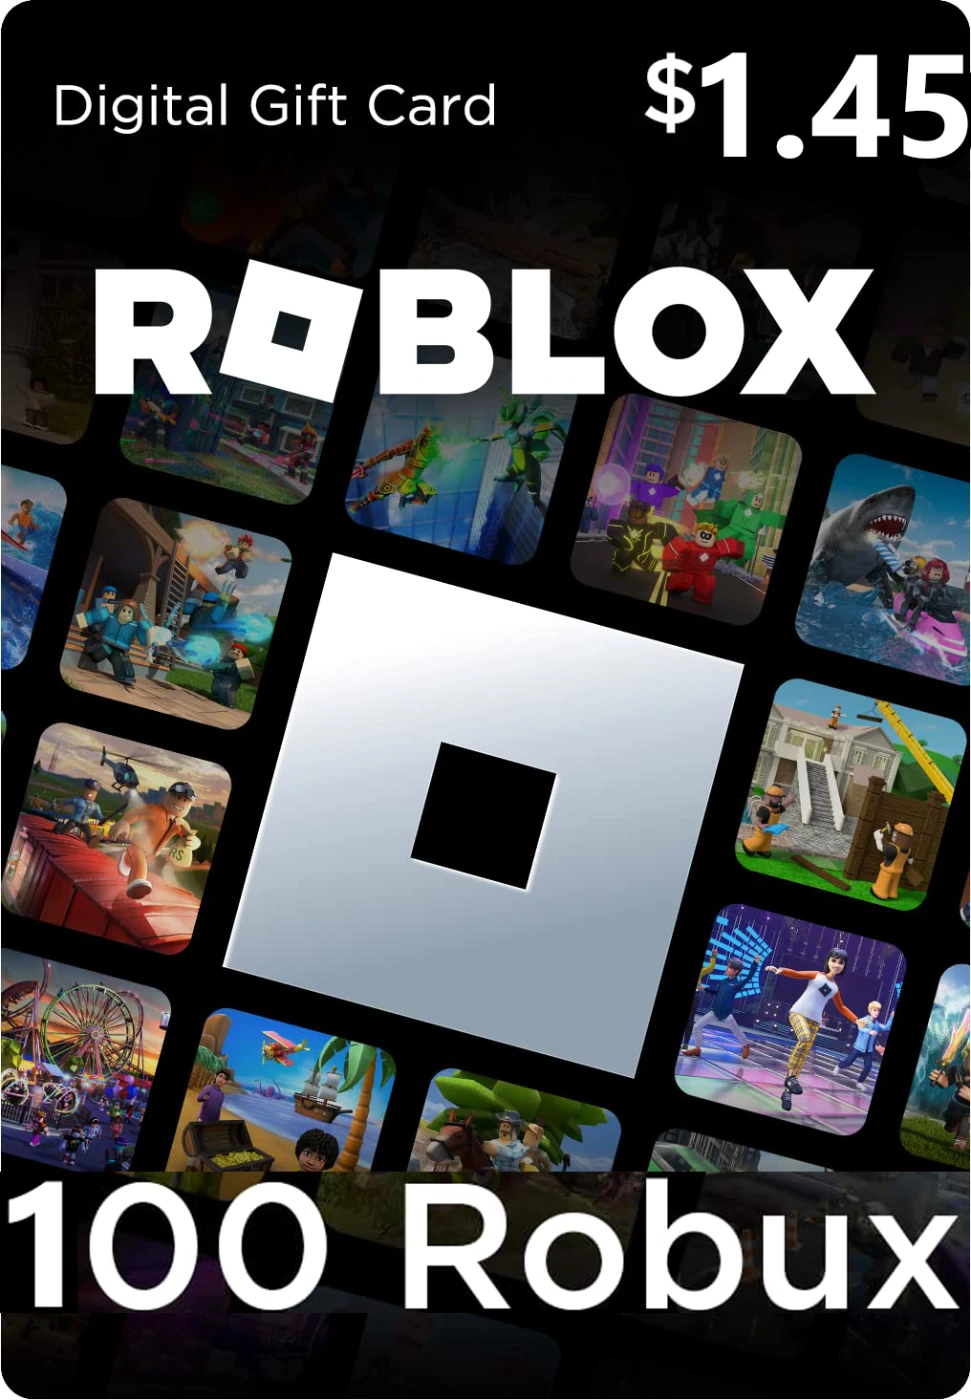 R$10,00 Gift Card 100 Robux - Redeem Code - Roblox - DFG